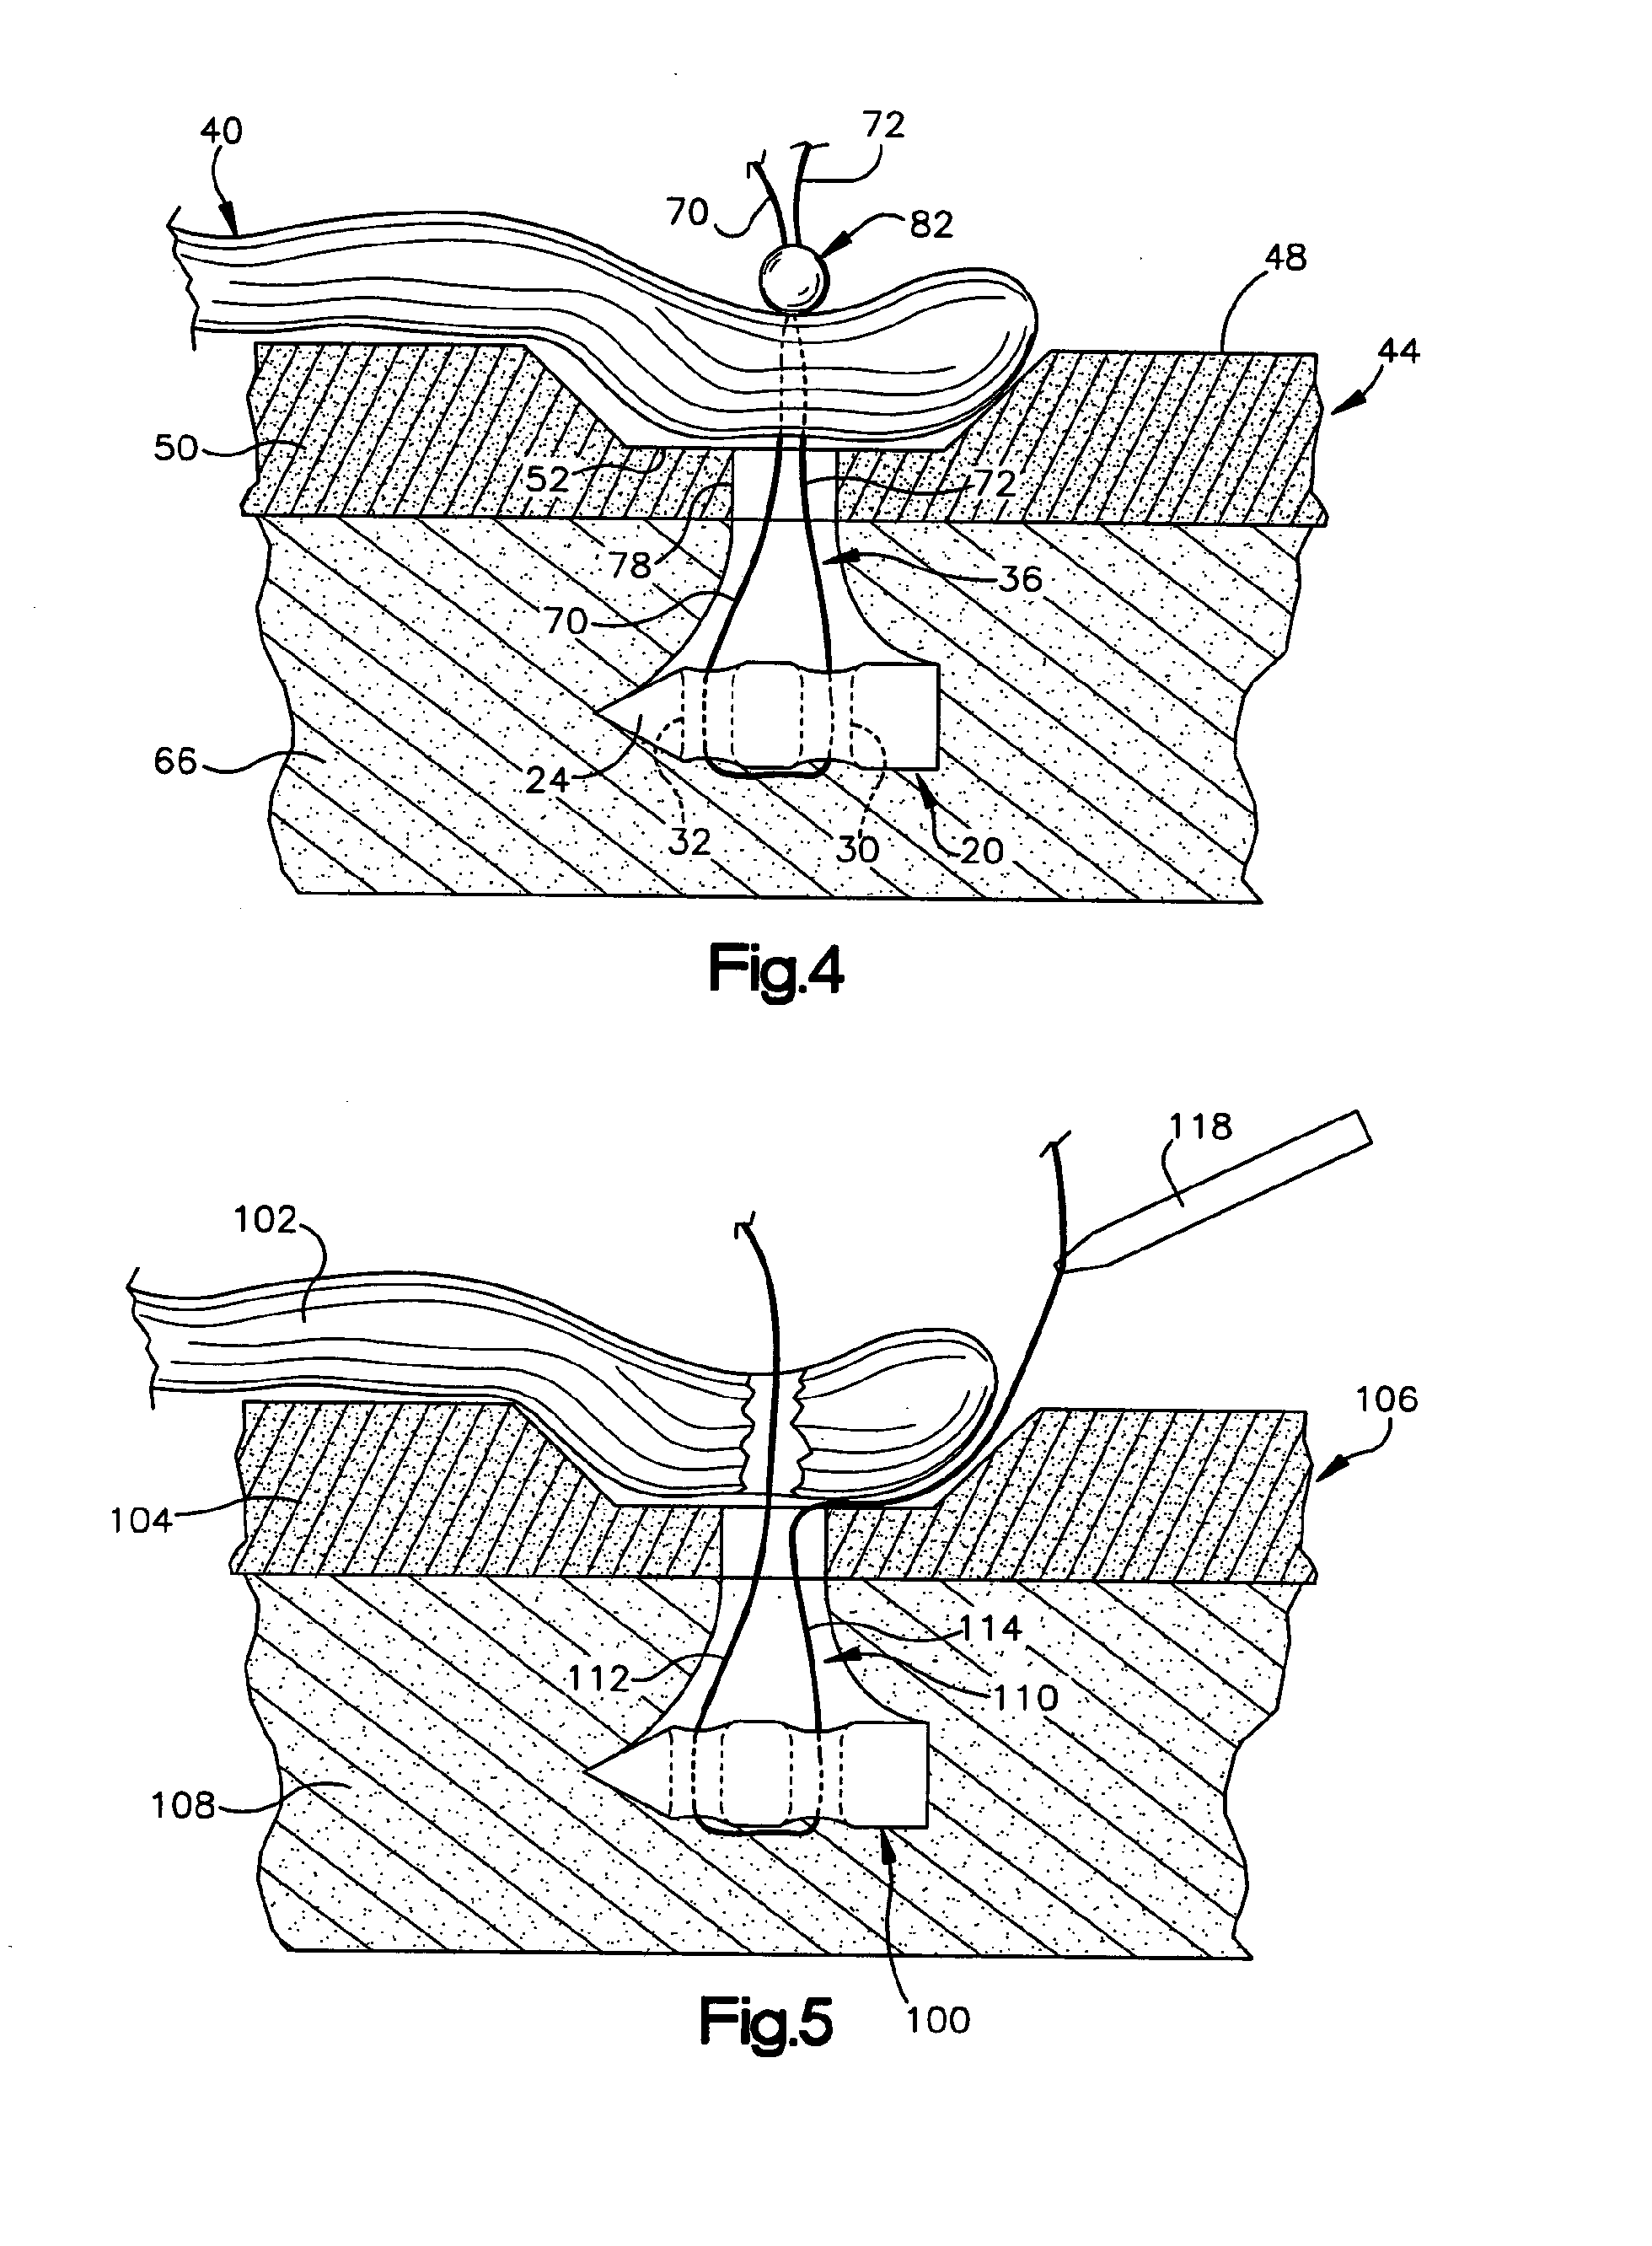 Method of connecting body tissue to a bone